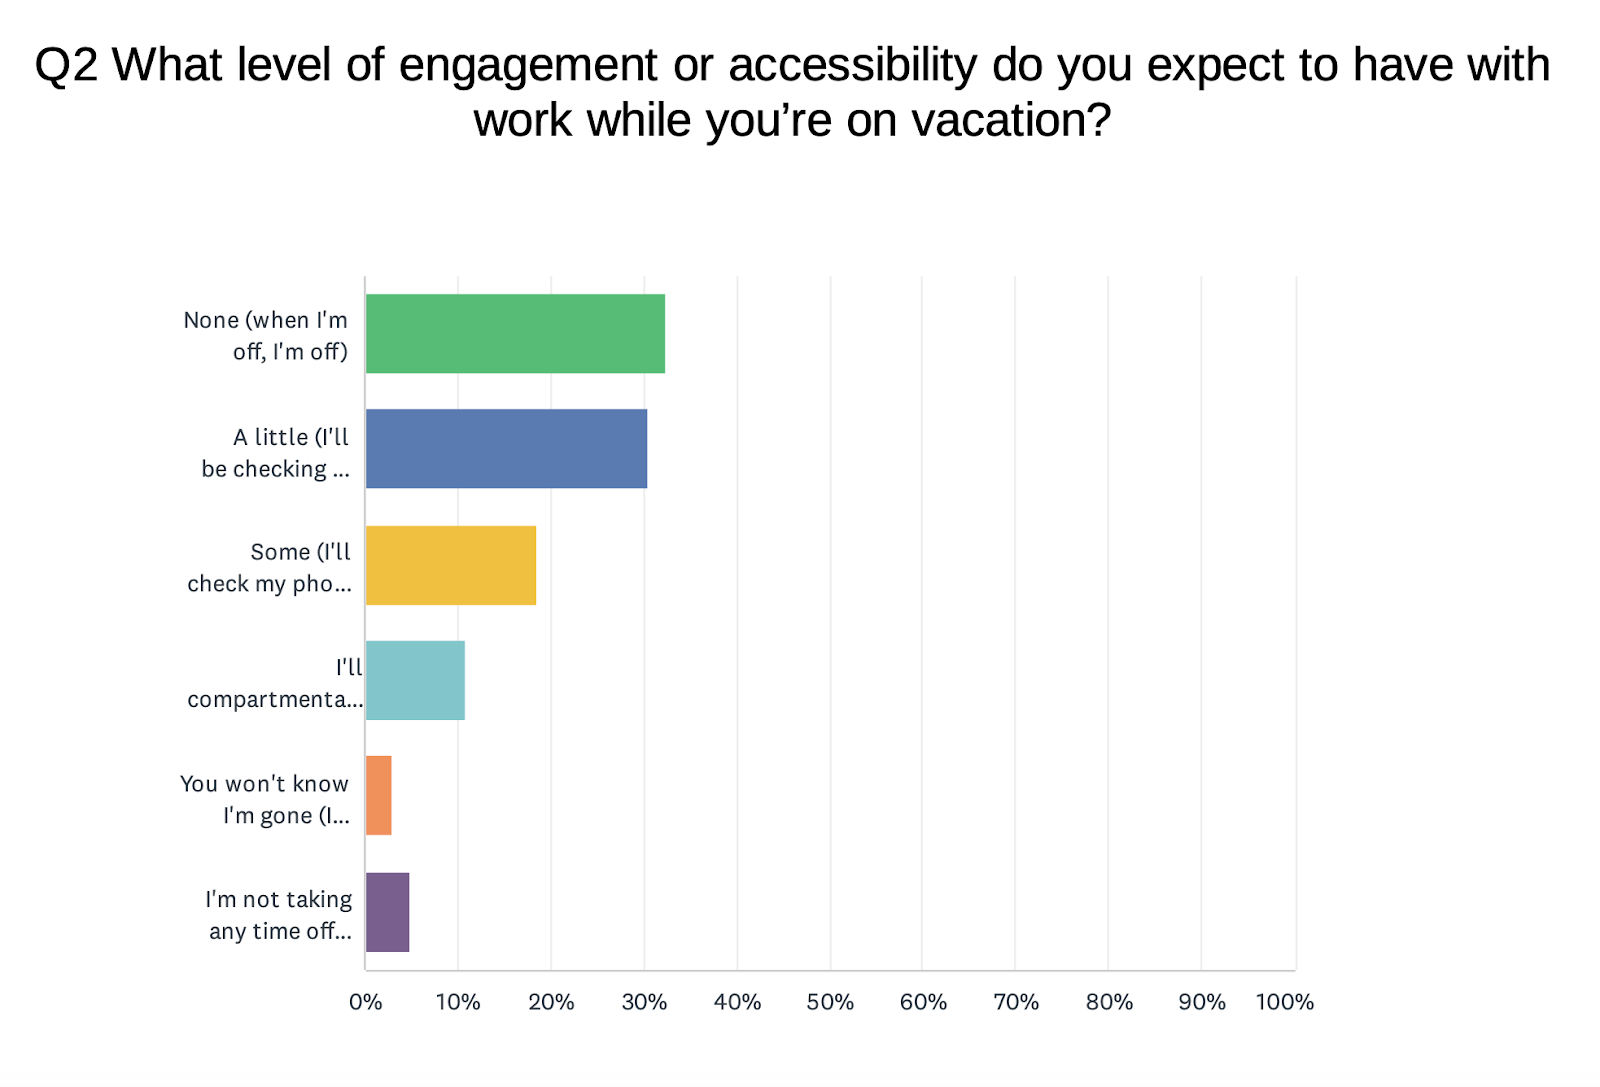 "Q2 What level of engagement or accessibility do you expect to have with work while you're on vacation?" followed by a bar chart showing ~32% for "none (when I'm off, I'm off)", 30% for "A little (I'll be checking ...", ~28% for "Some (I'll check my pho...", ~10% for "I'll compartmenta...", less than 5% for "You won't know I'm gone (I...", and ~5% for "I'm not taking any time off..."